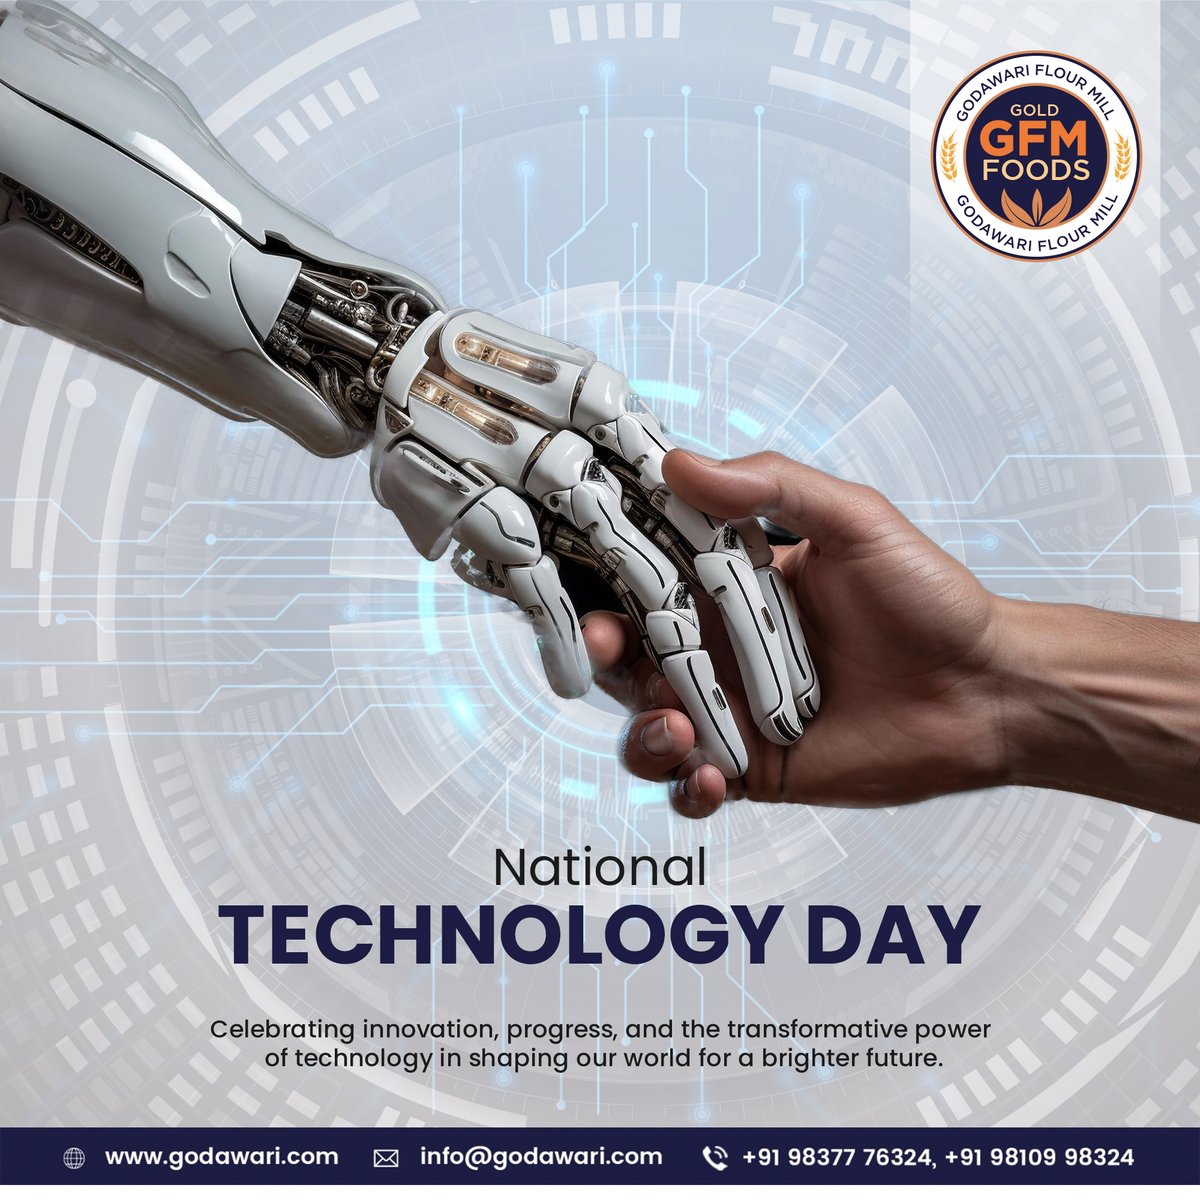 Celebrating the digital revolution on National Technology Day! 💻 

Let's embrace innovation and shape the future together.

#GodawariFlourMill #GodawariMill #GFM #NationalTechnologyDay #NationalTechnologyDay2024 #TechnologyDay #CelebratingInnovation #TechandInnovation